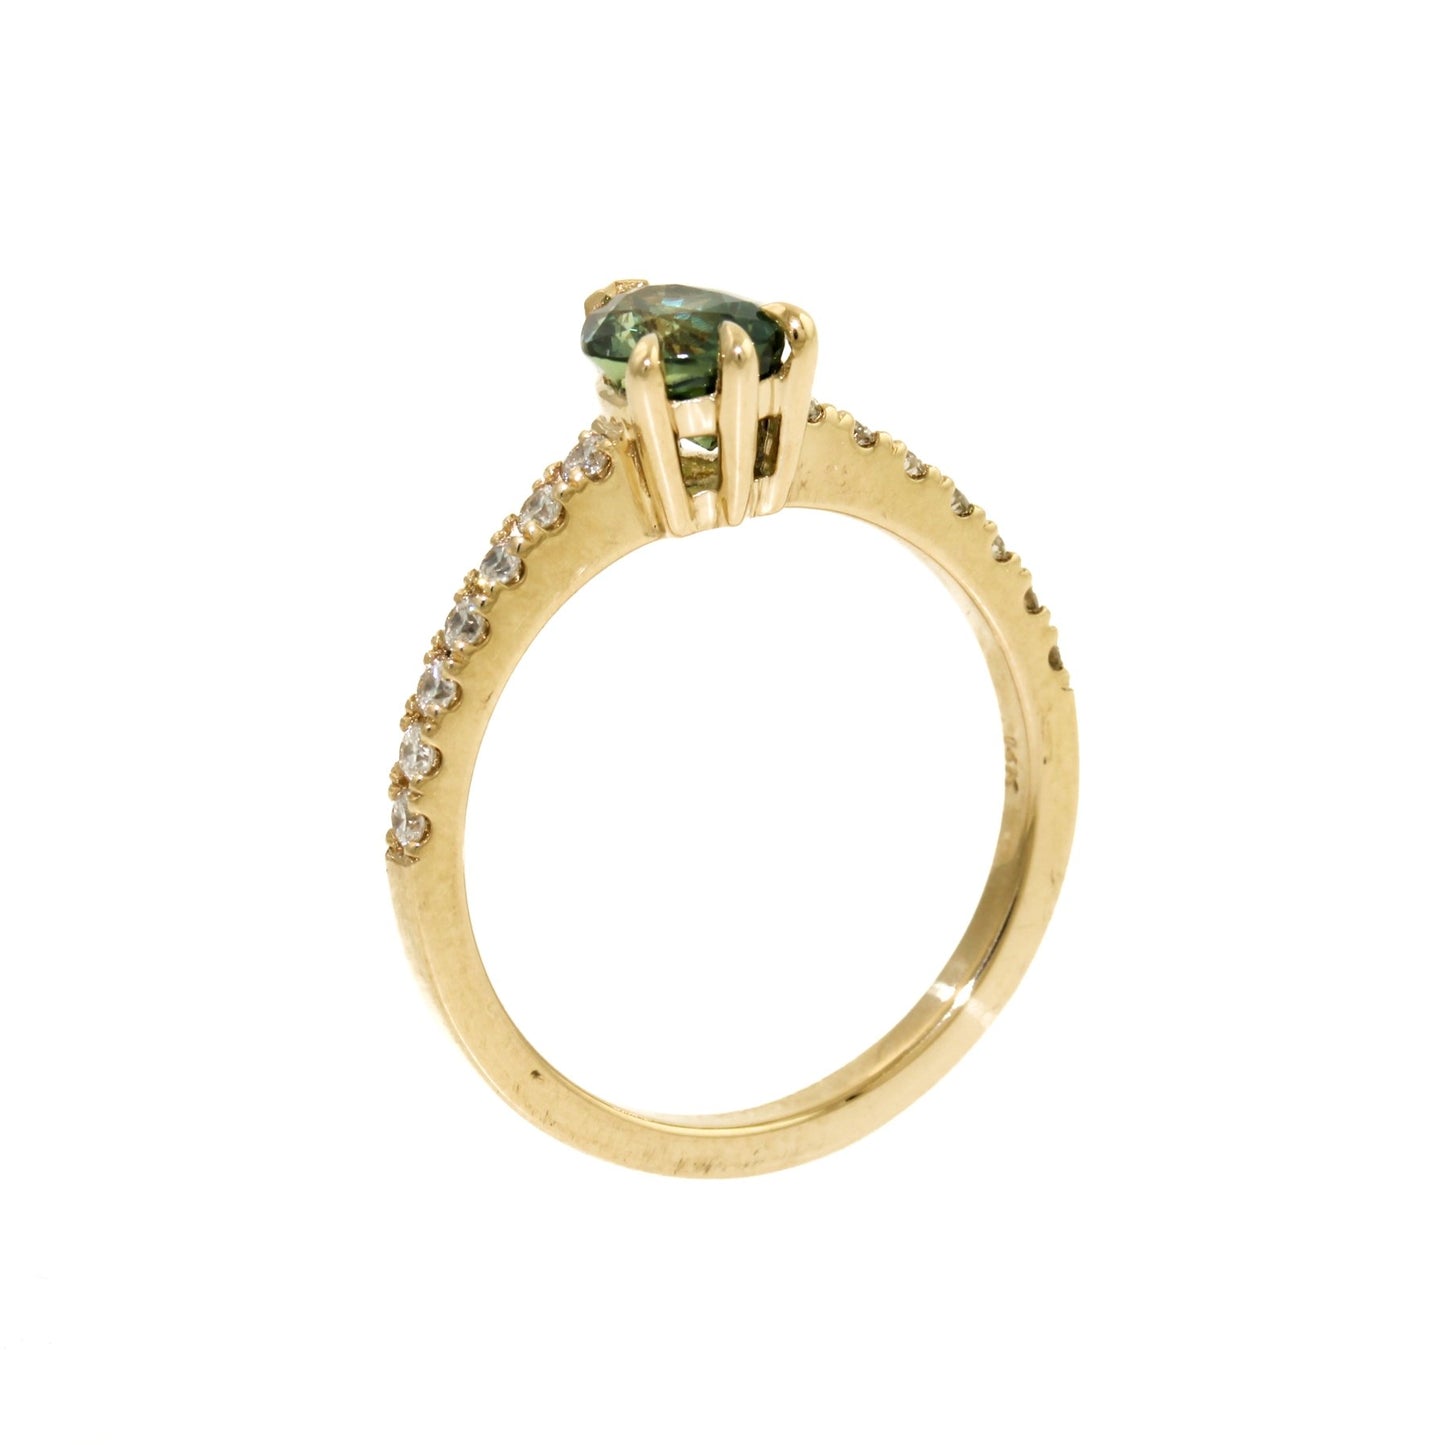 An alluring seafoam green sapphire, cut in the shape of a teardrop to flatter and elongate the finger. This beautiful stone is set in a 14k gold bezel, surrounded by brilliant tiny diamonds.